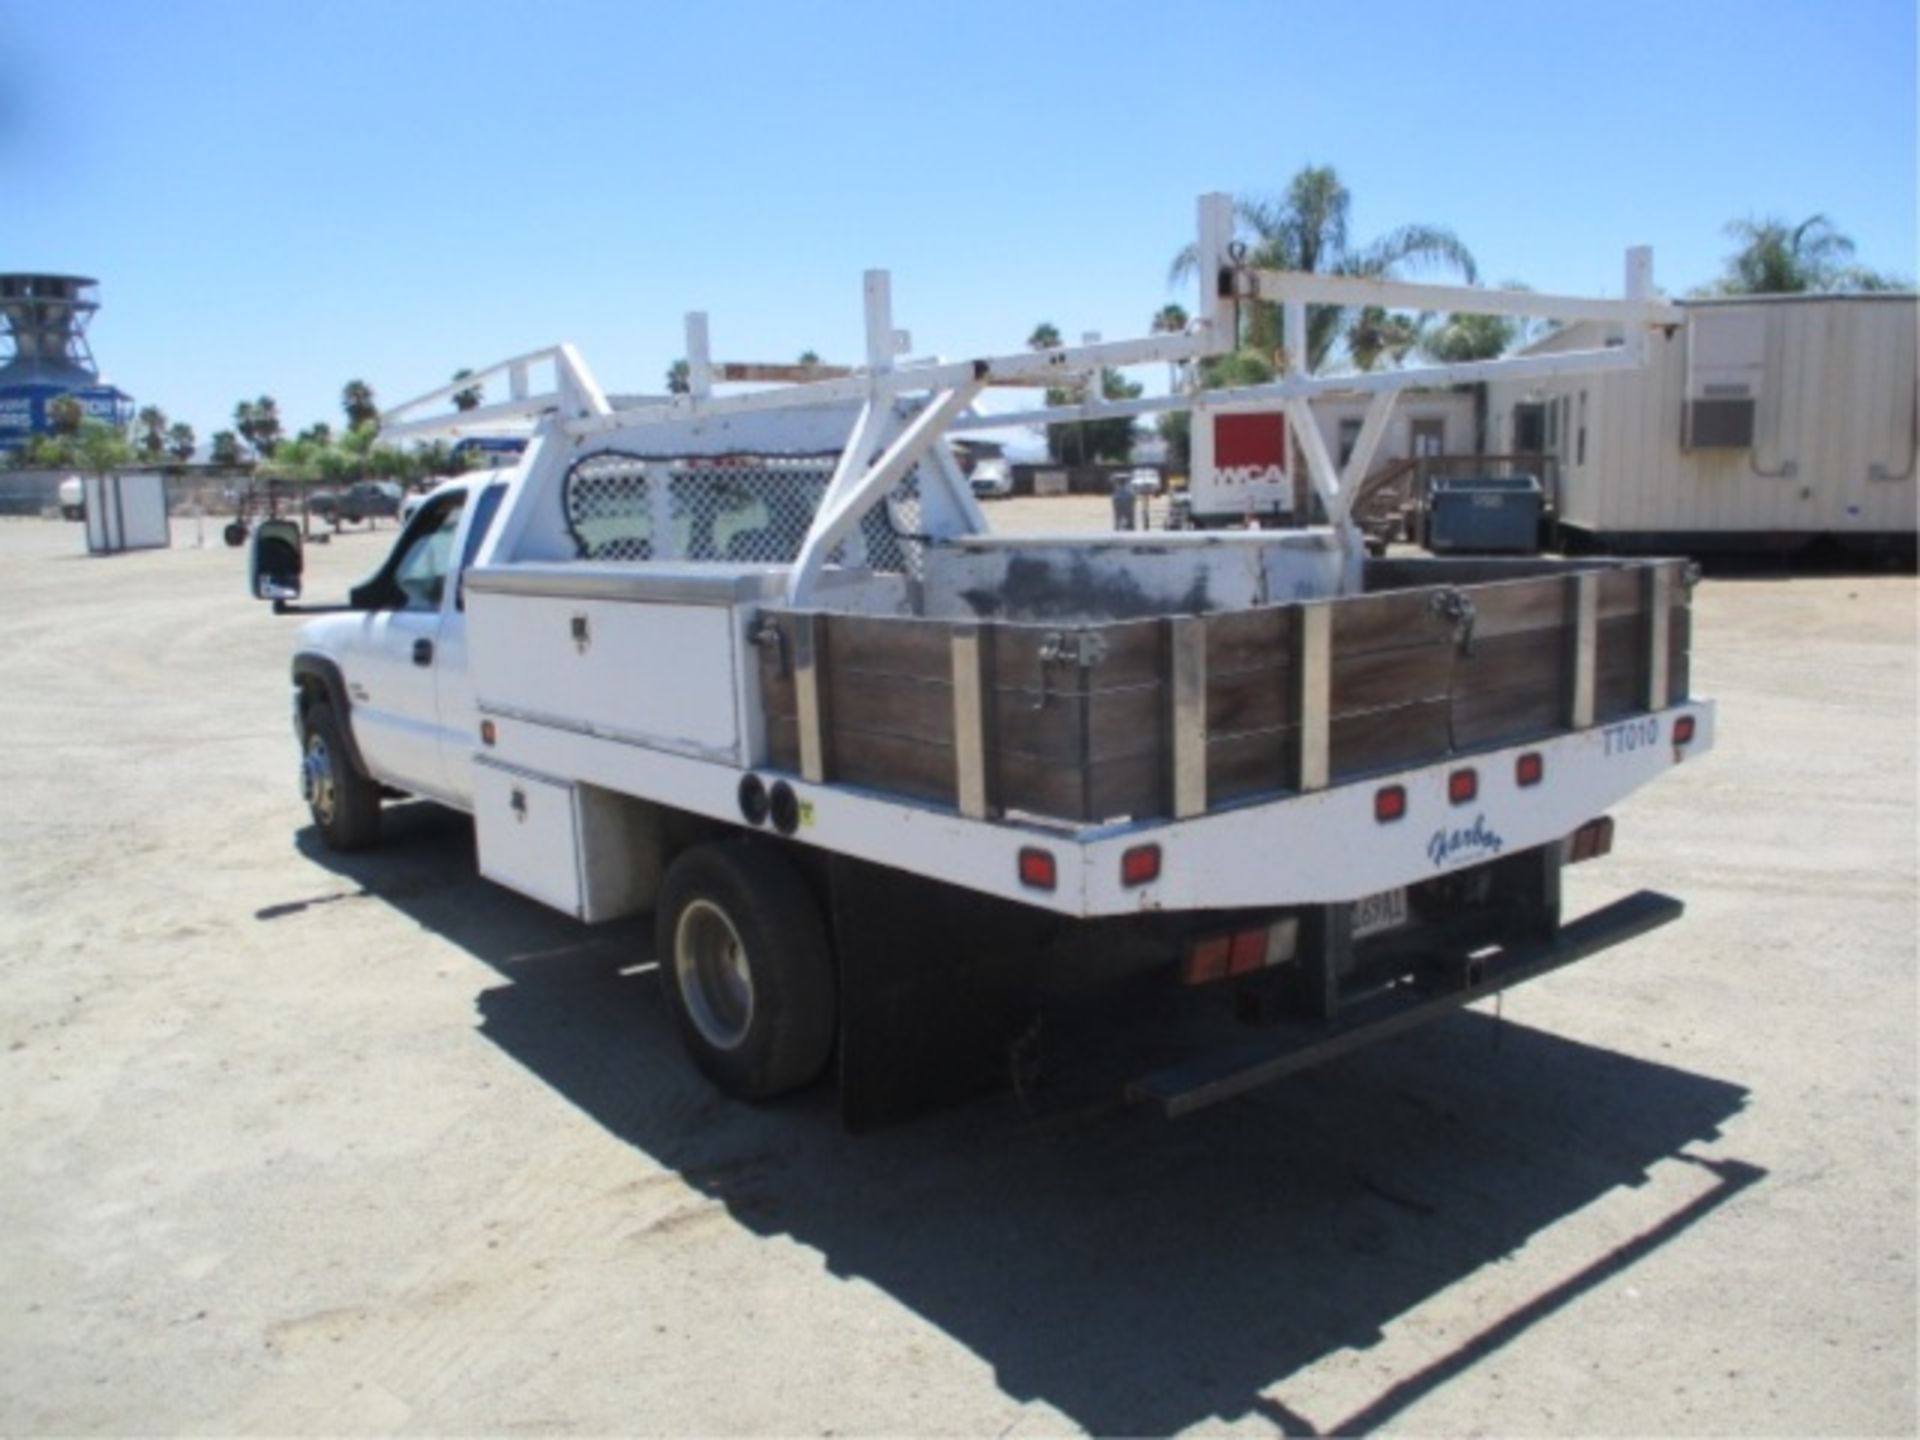 2006 Chevrolet 3500 Extended-Cab Utility Truck, 6.6L Turbo Diesel, Automatic, Tool Boxes, Lumber - Image 20 of 71